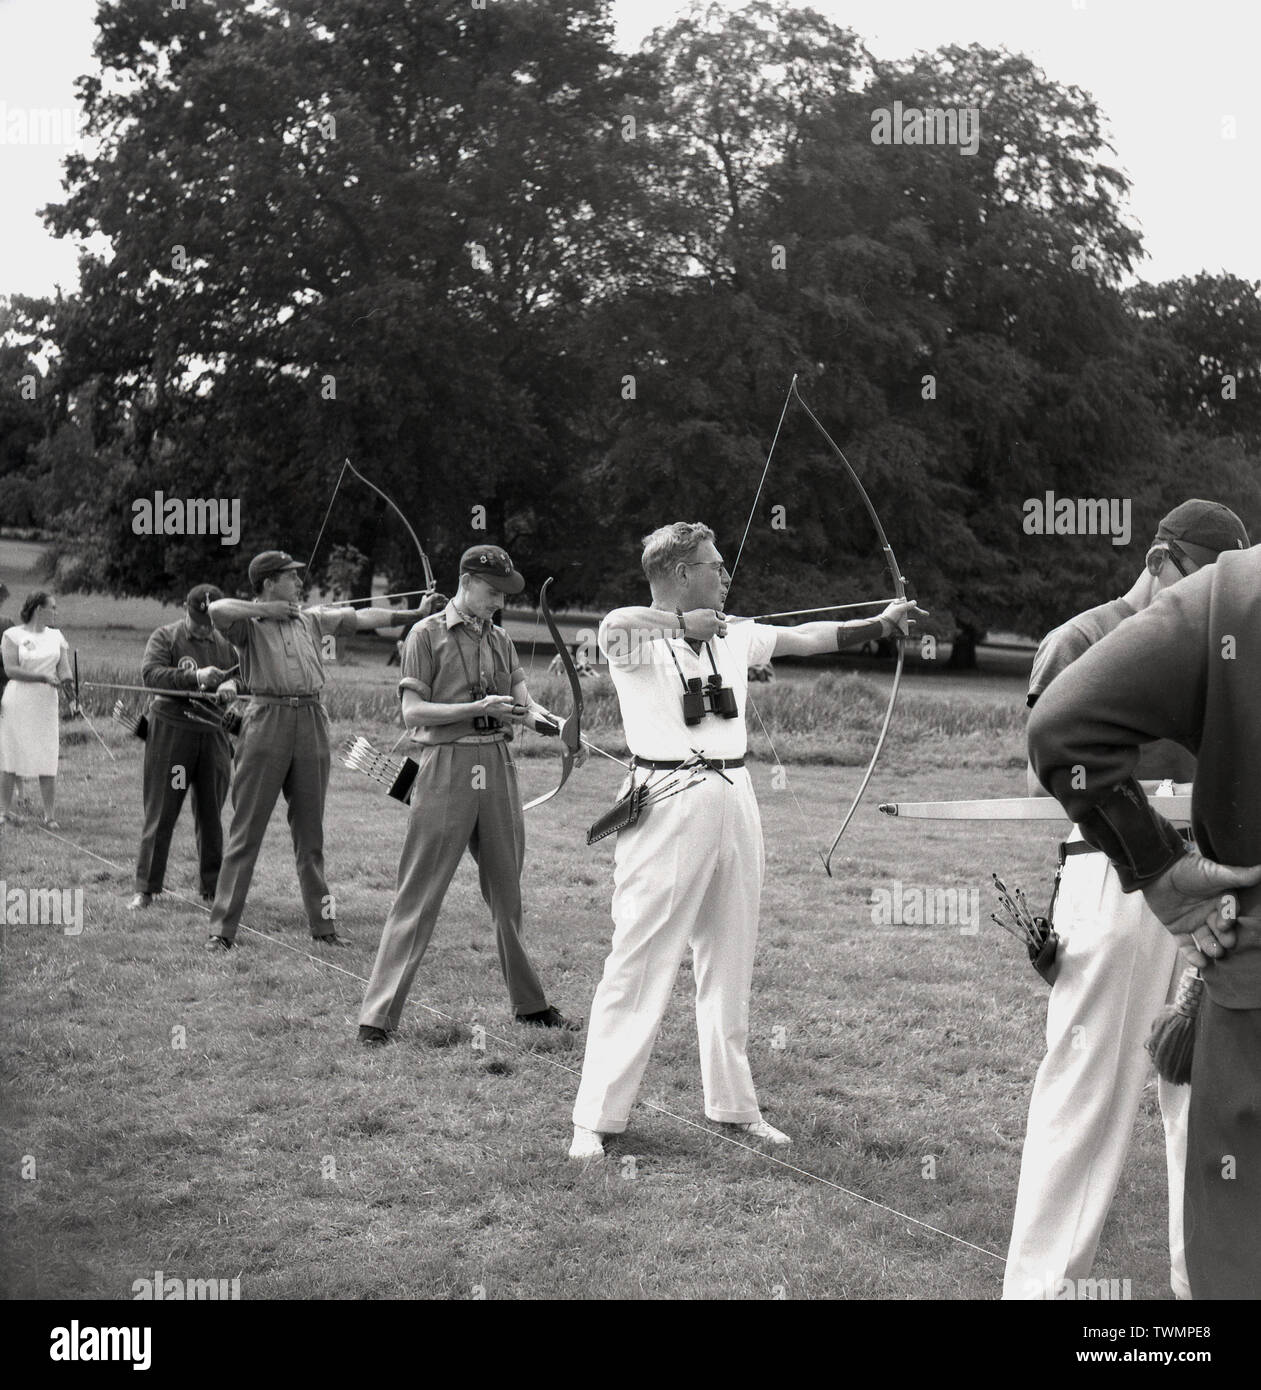 1960s, historical, outdoor archery competition, males and archers and a female archer line-up in a field with their bows and arrrows taking aim, England, UK. Stock Photo